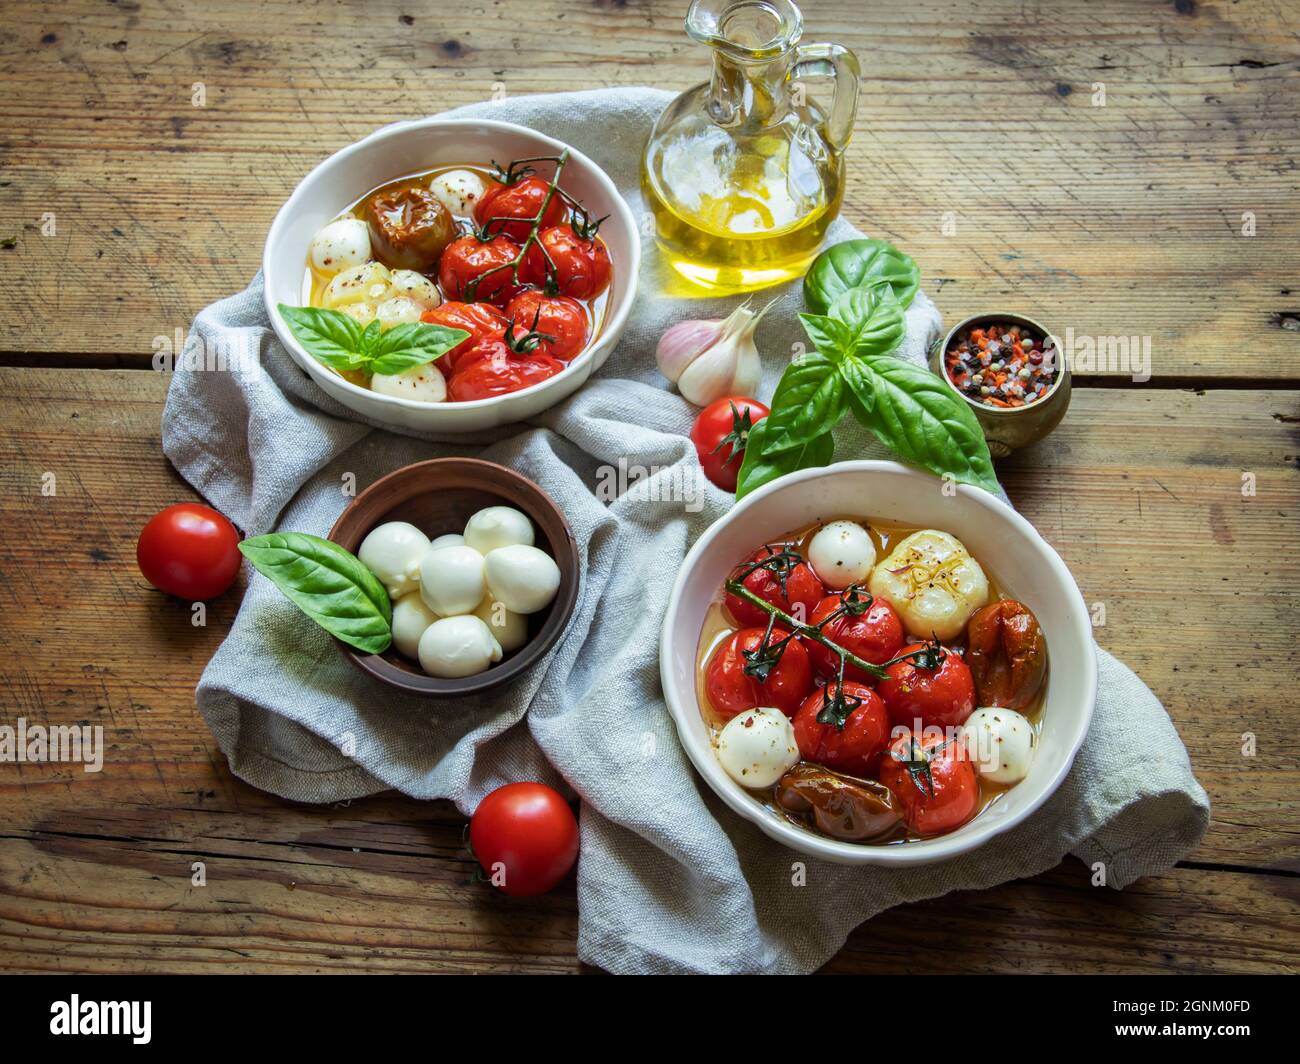 Salad. Baked tomato, basil, garlic with mozzarella cheese, ceramic dishes. cooking, cooked dish Stock Photo